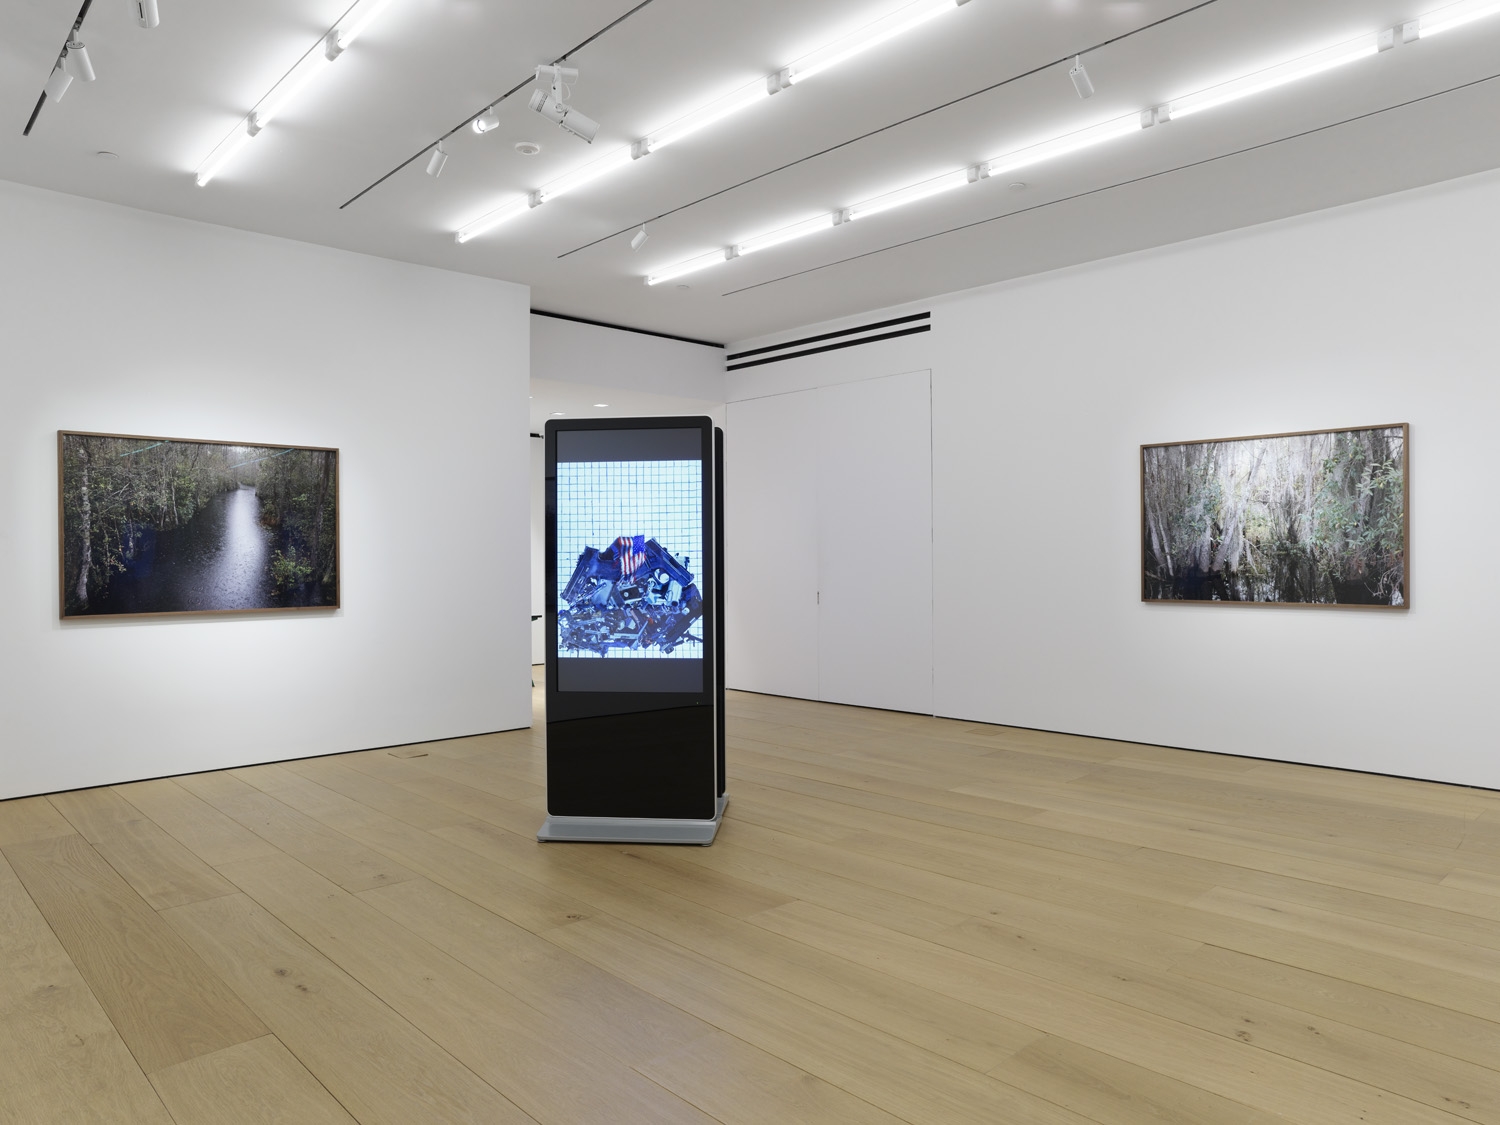 Third installation view of the exhibition Catherine Opie: Rhetorical Landscapes at Lehmann Maupin New York